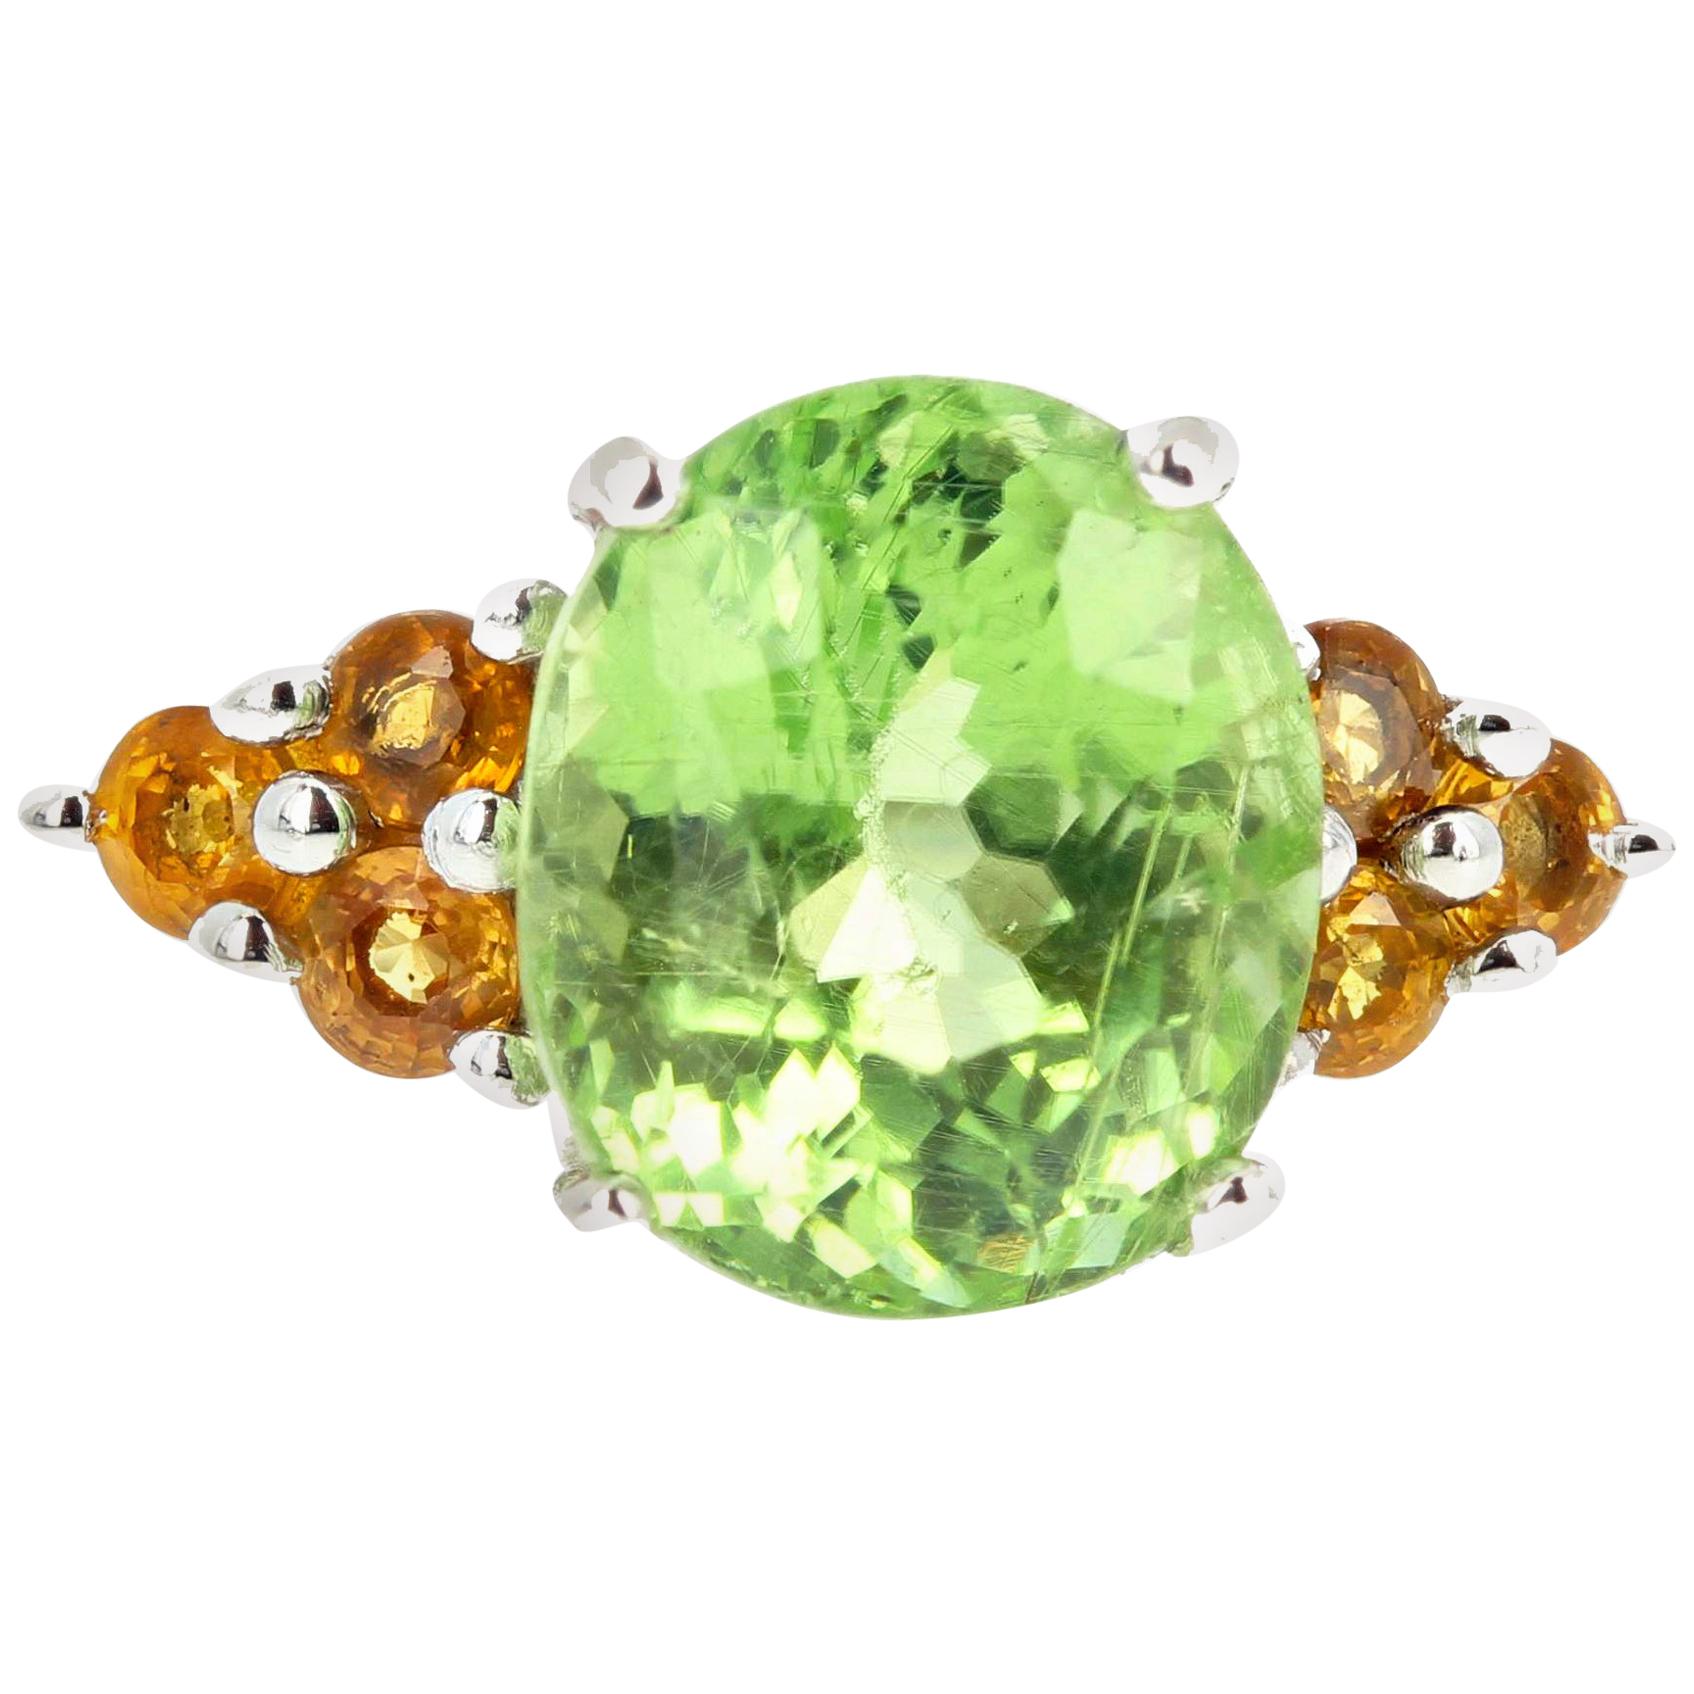 AJD Gorgeous Brilliant 5.54 Ct Green Tourmaline & Golden Citrine Silver Ring For Sale